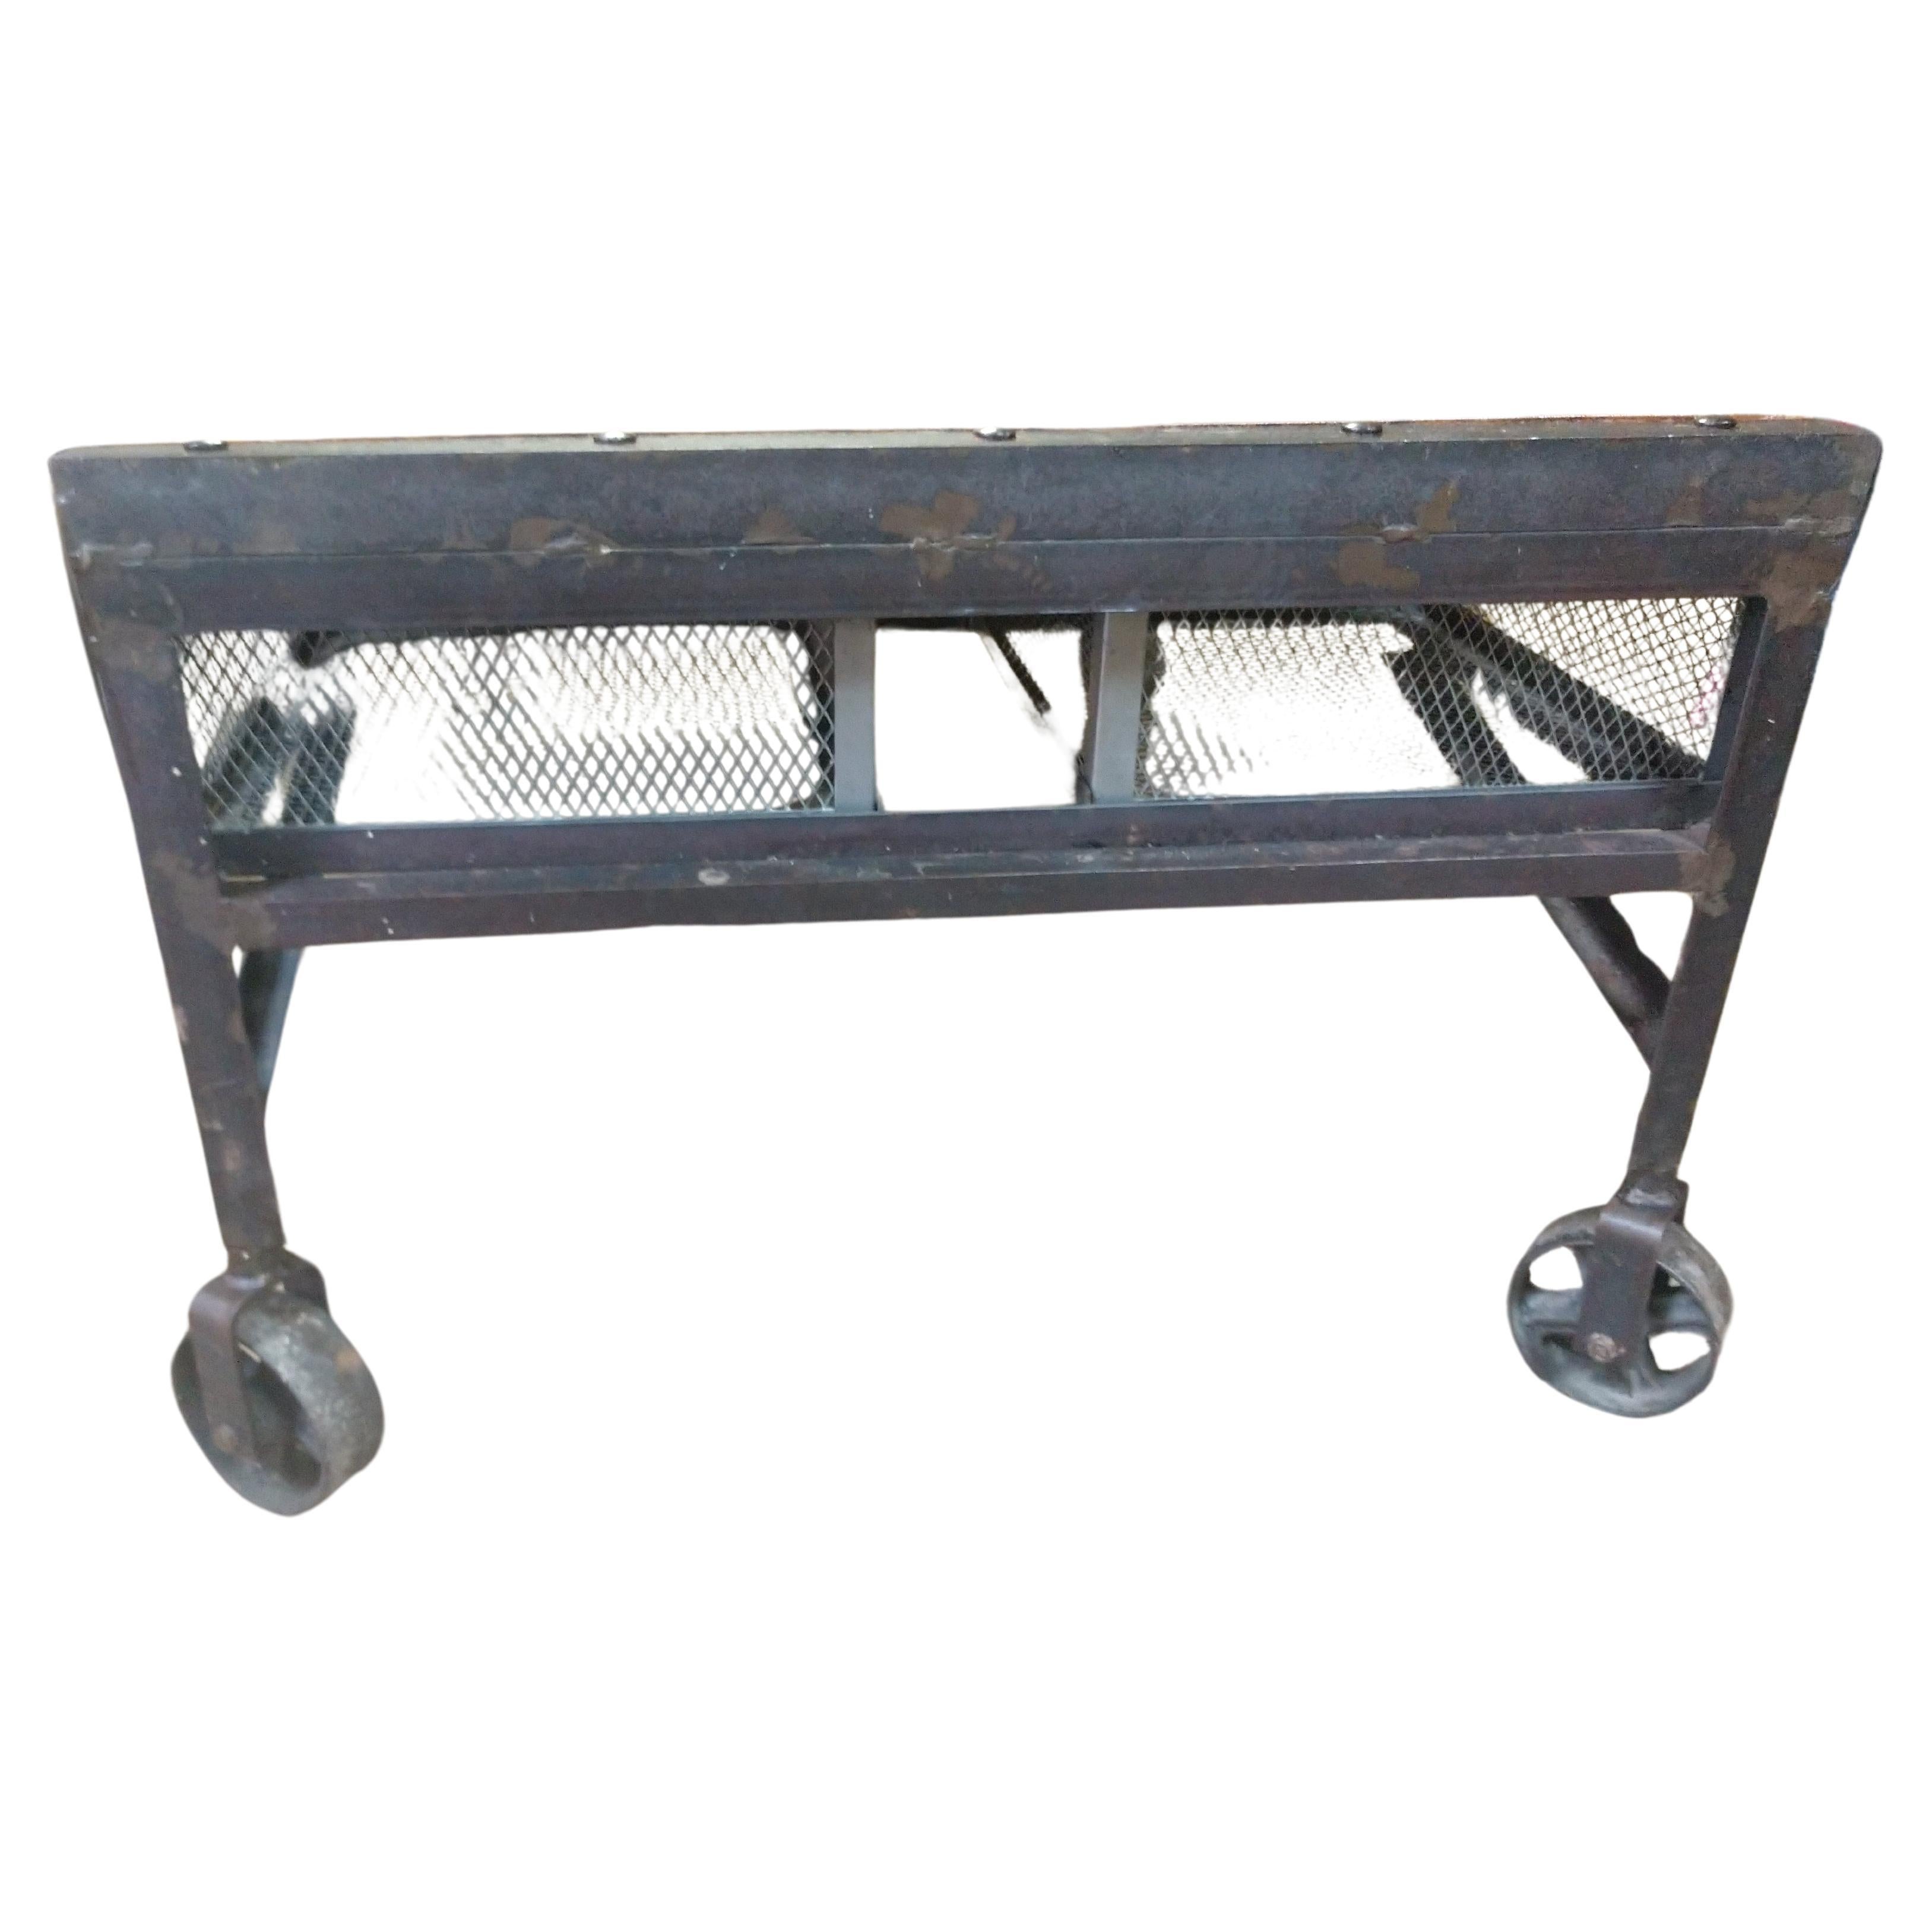 Industrial Style Loading Dock Cart Cocktail Table Six Wire Basket Drawers In Good Condition For Sale In Port Jervis, NY